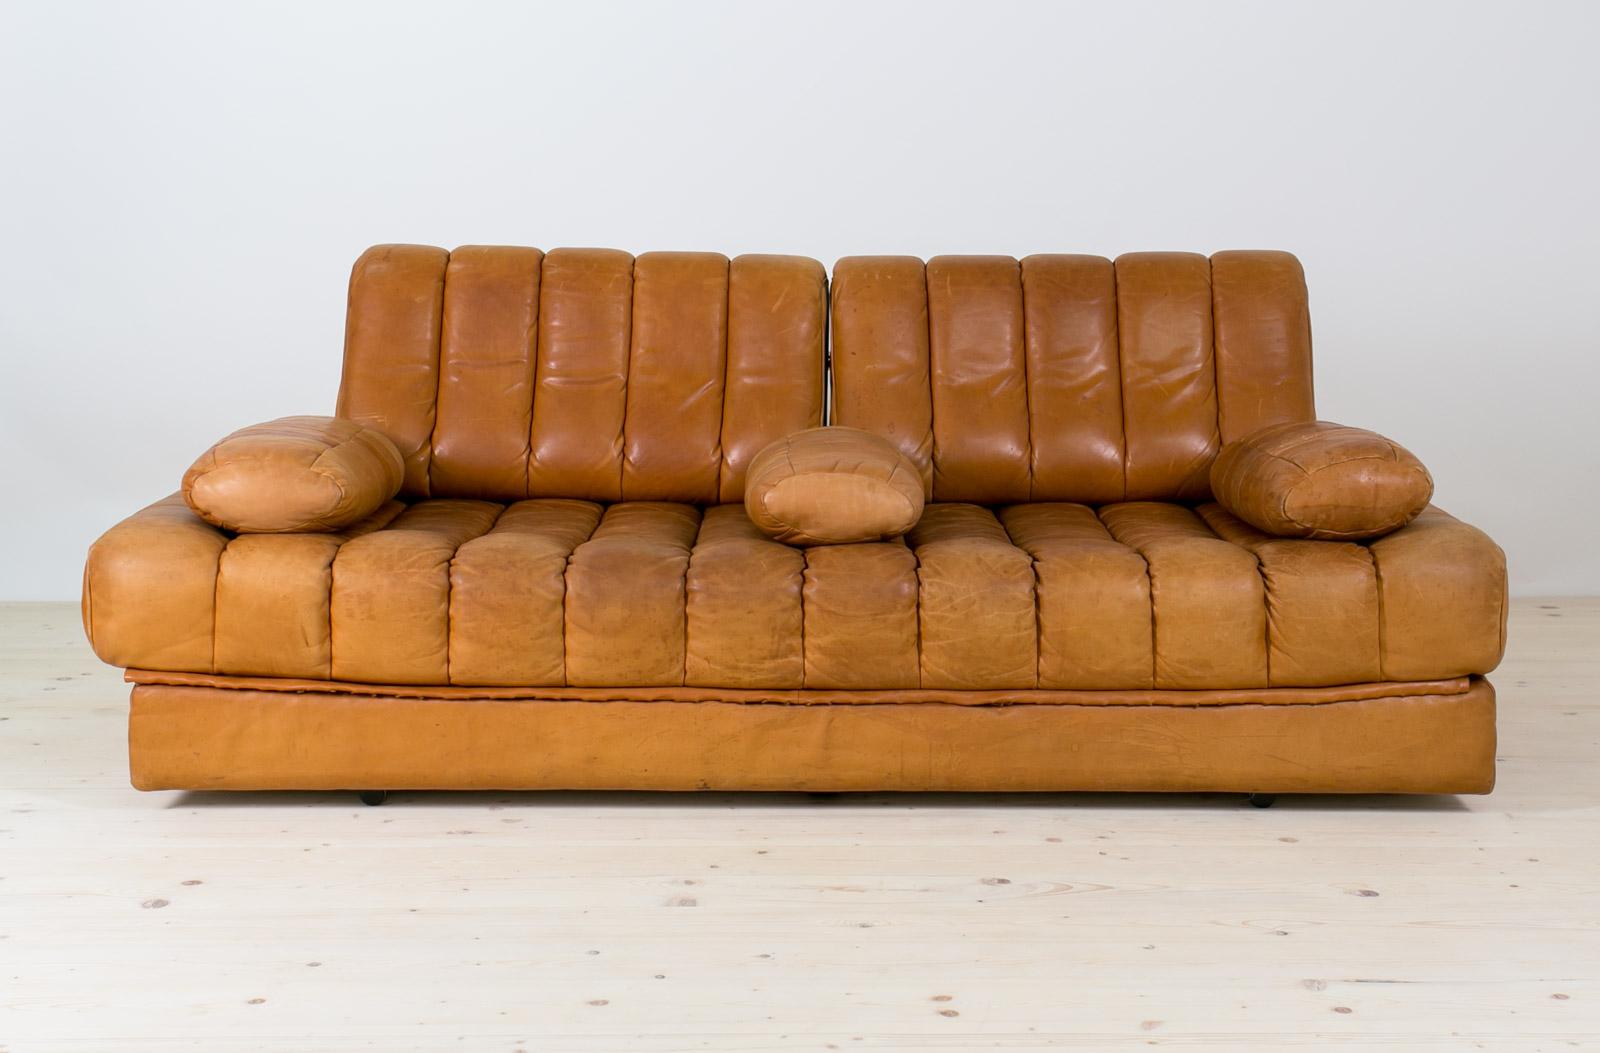 Vintage Swiss De Sede Sofa Bed from the 1960s, model DS 85 4